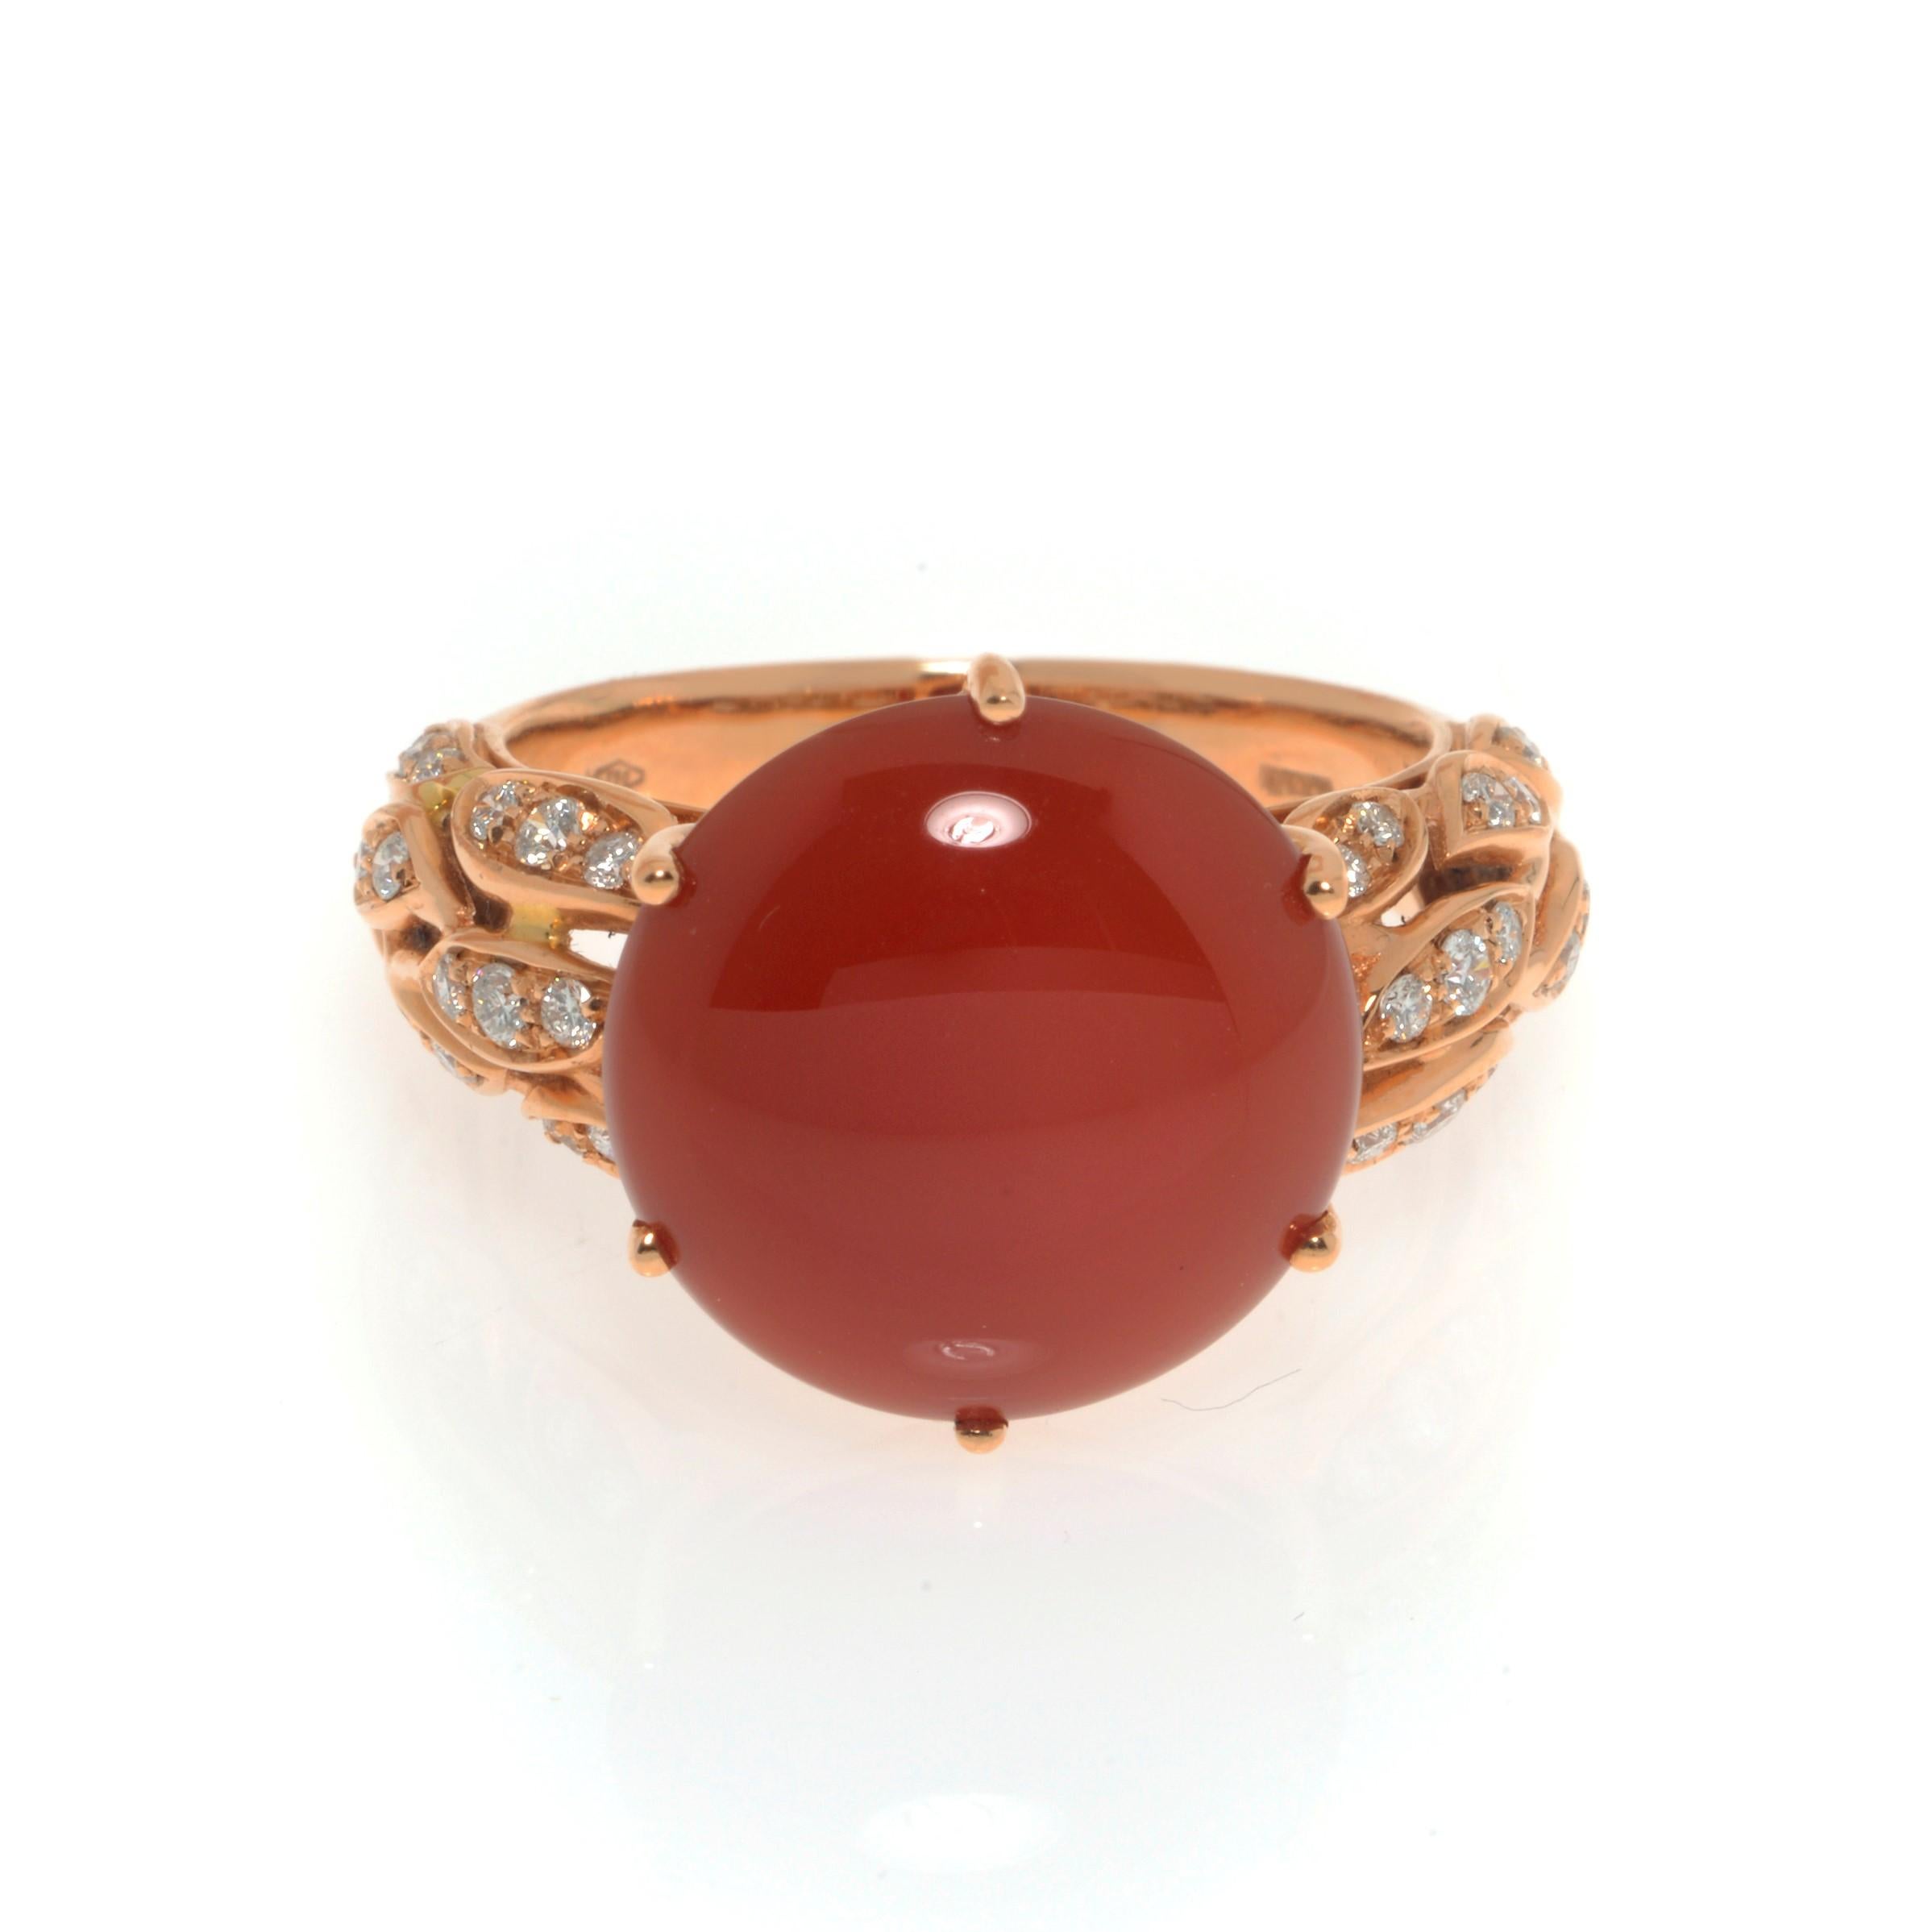 A cabochon center red Agate ring with pave set diamonds. Crafted in 18K rose gold. Total carat weight 0.34. Diamond color G and VVS clarity. Ring size 7.75. Comes with original box and a certificate.